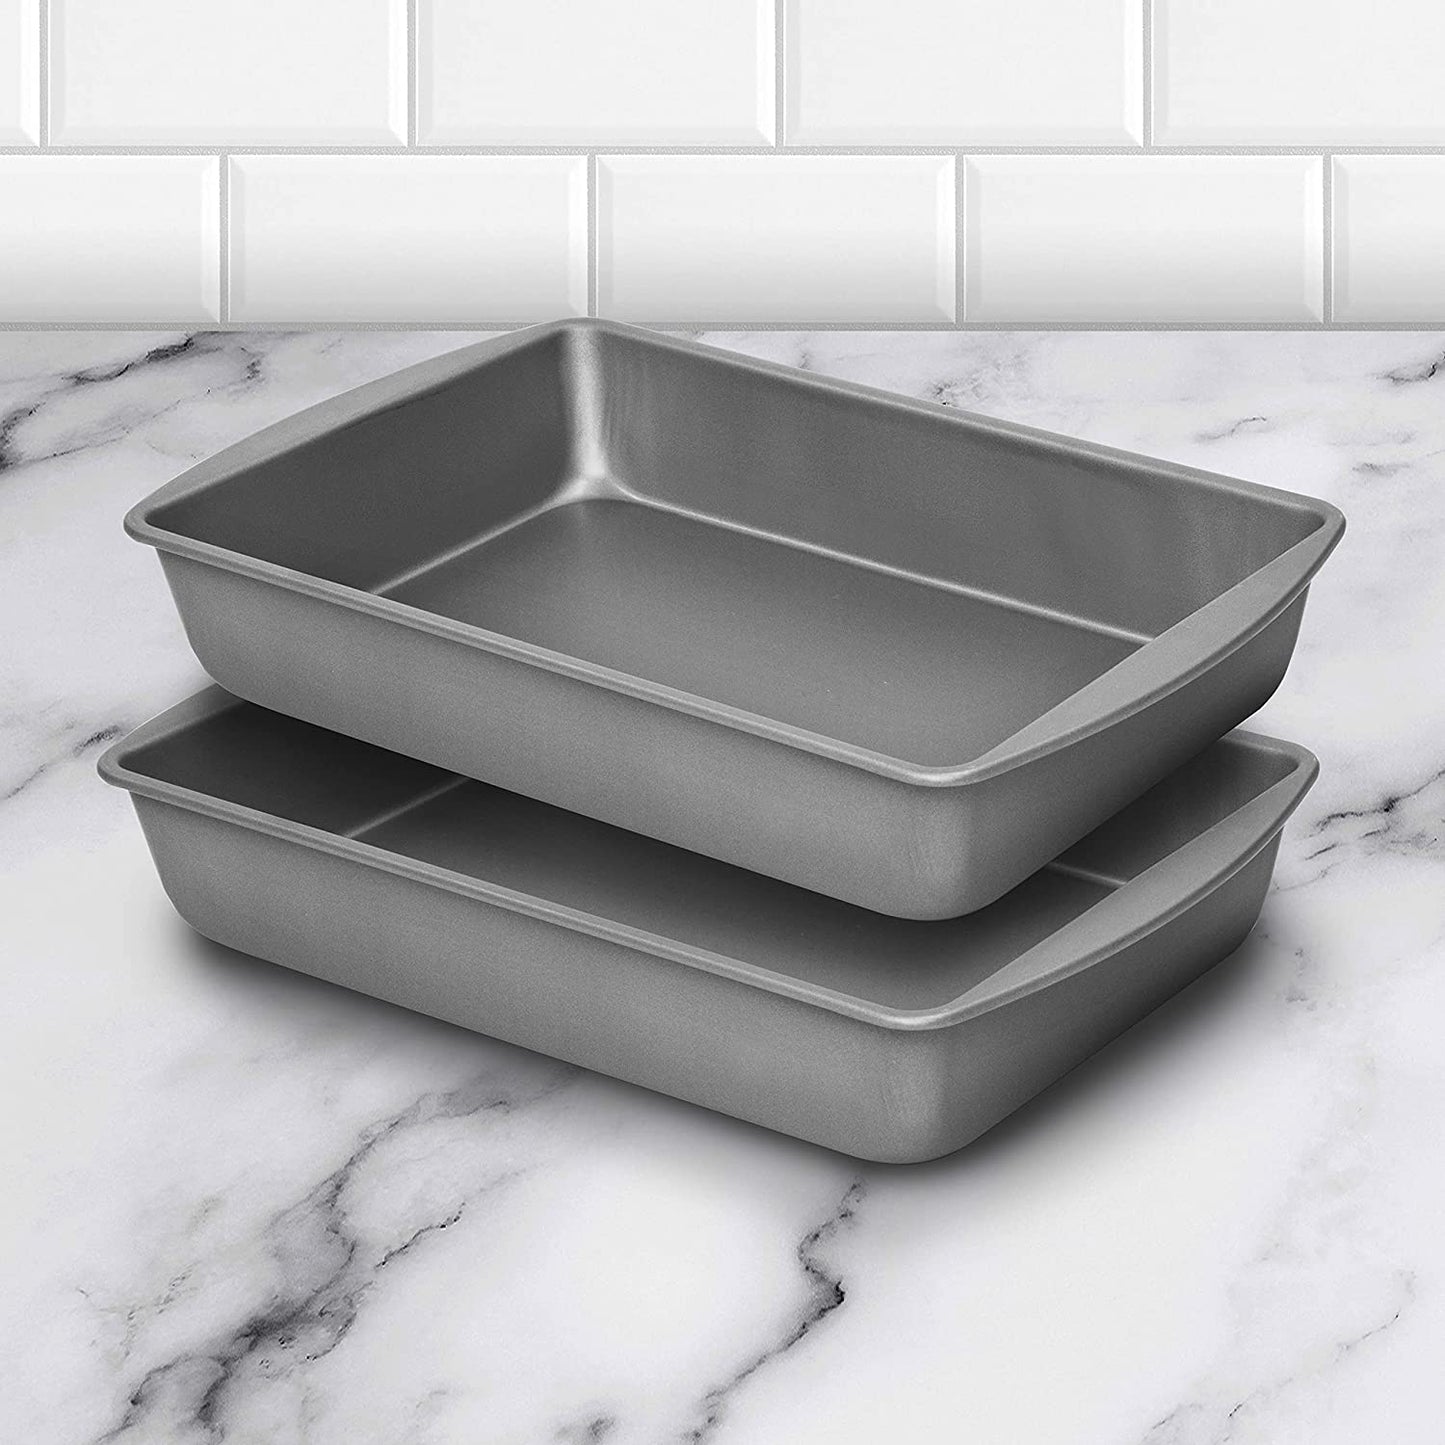 OvenStuff Set of Two Nonstick Bake and Roasting Pans